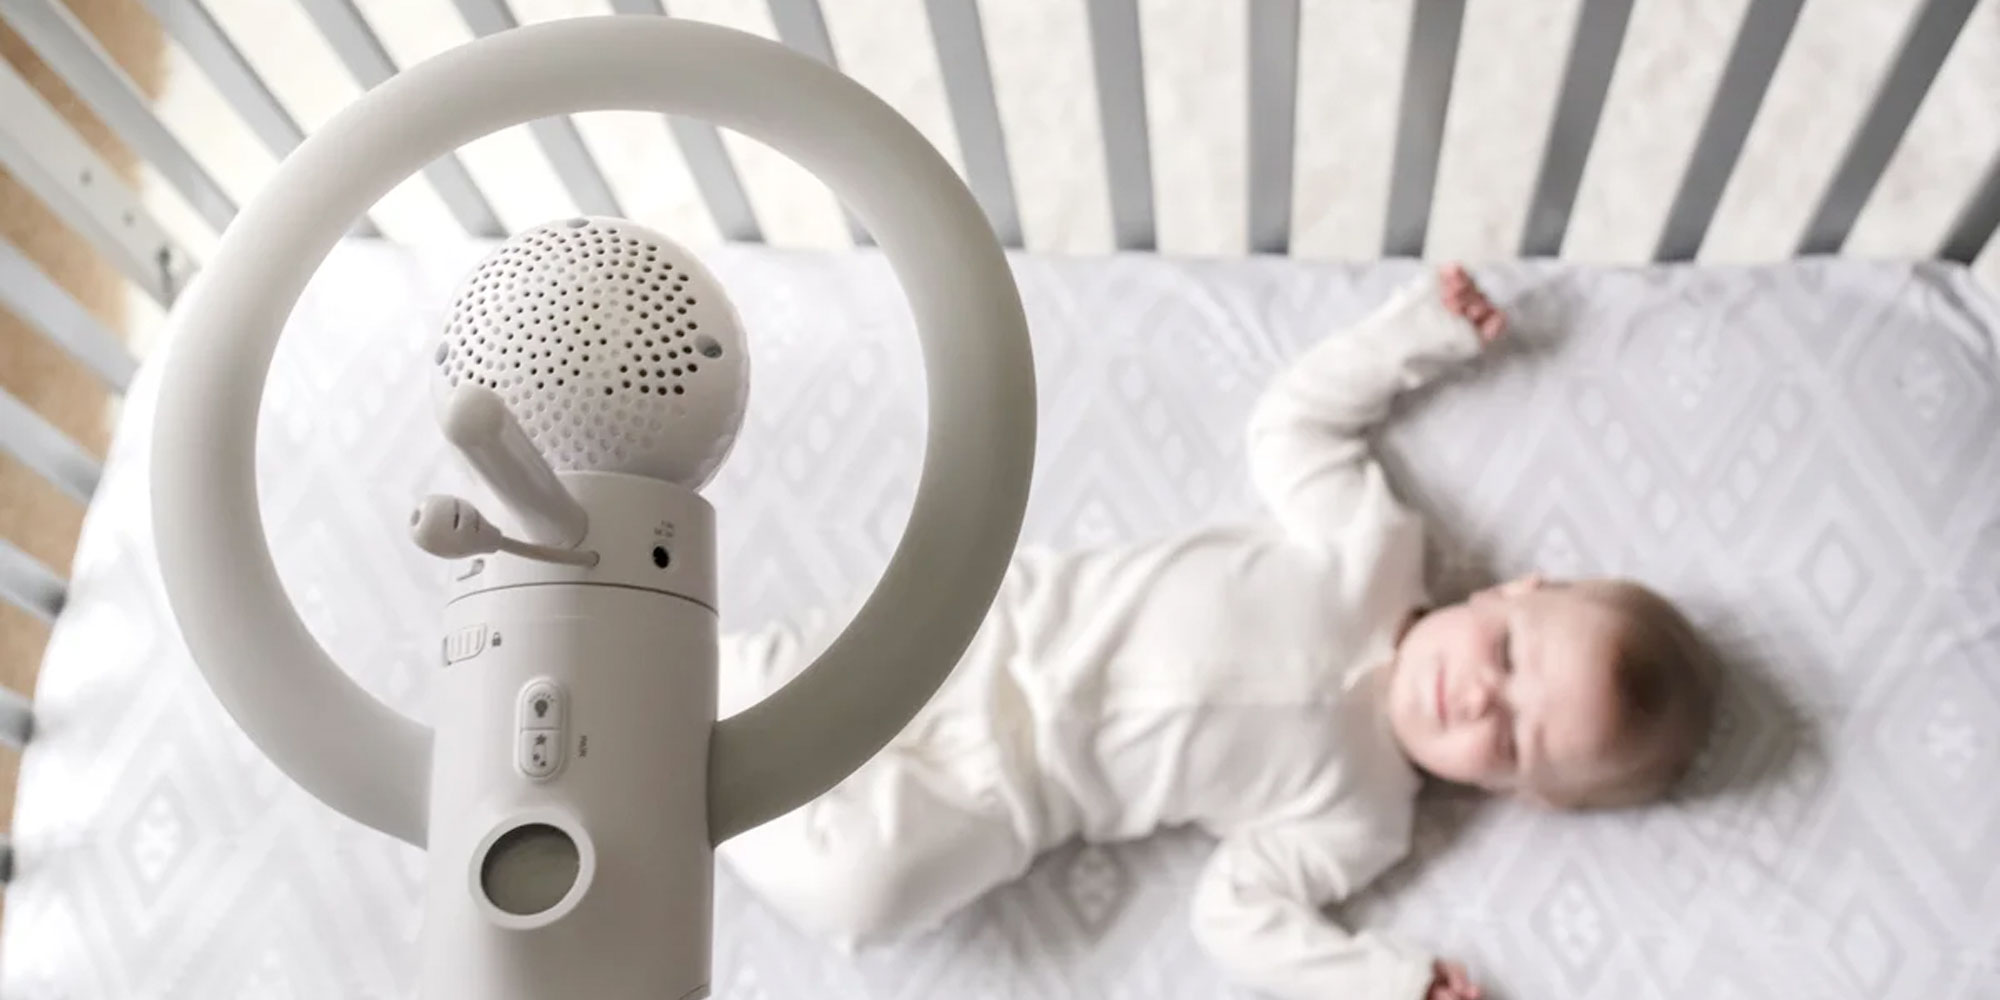 cloud baby monitor app review